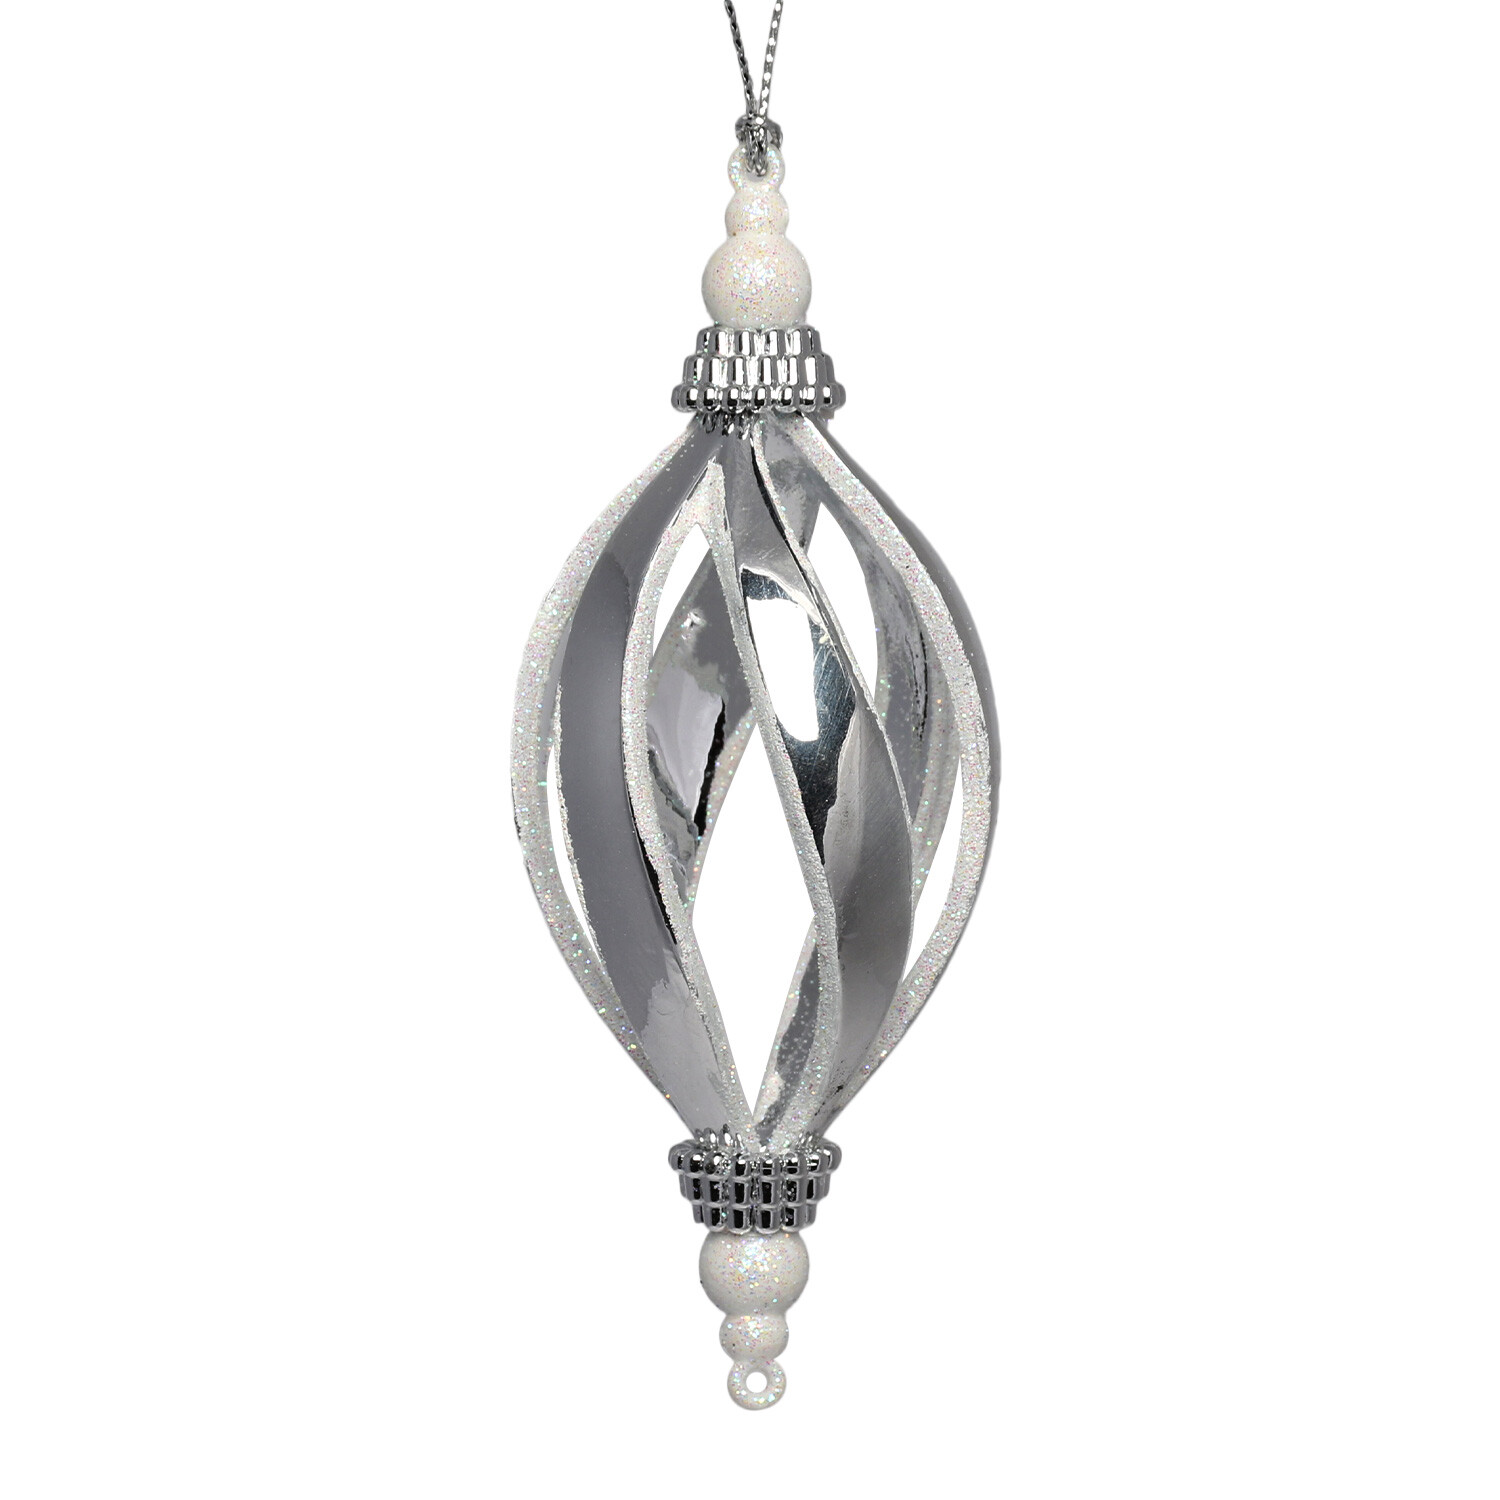 Single Midnight Fantasy Silver Droplet Ornament in Assorted styles Image 1